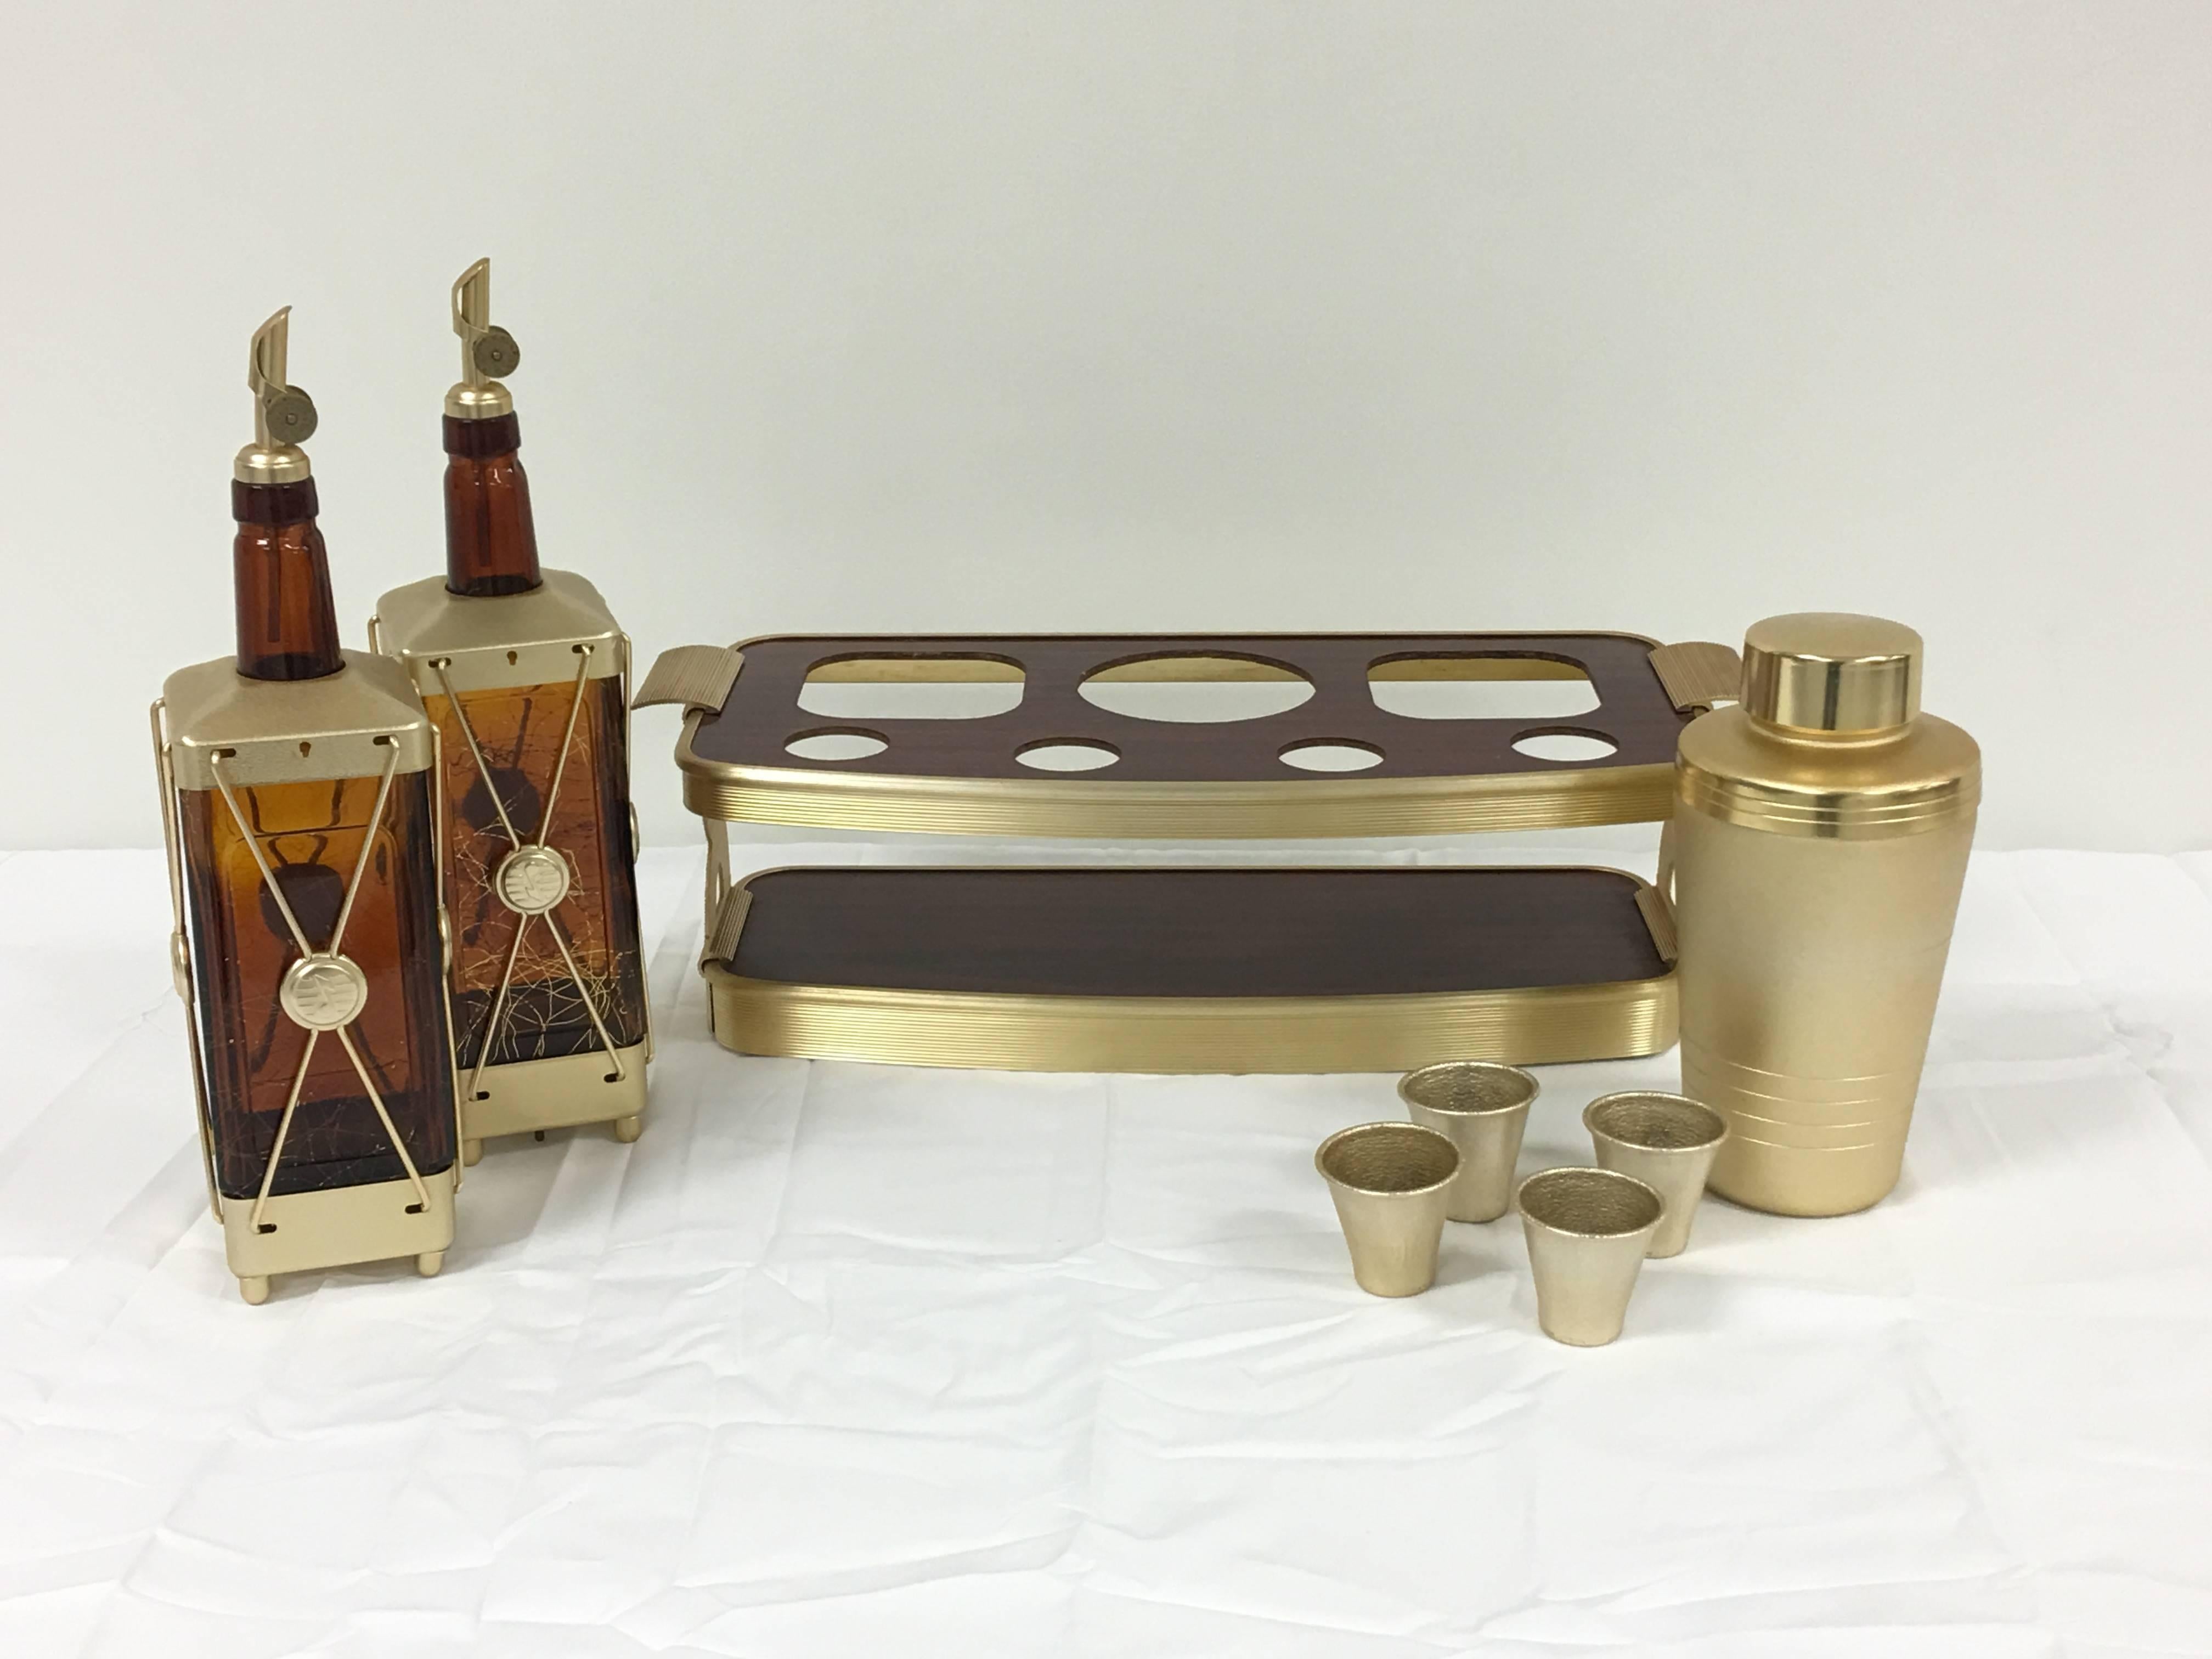 Offered is an absolutely gorgeous, burl wood veneer and gold stainless steel cocktail bar set. Set includes four shot glasses, one shaker with lid, two glass pourers, and one bar tray.